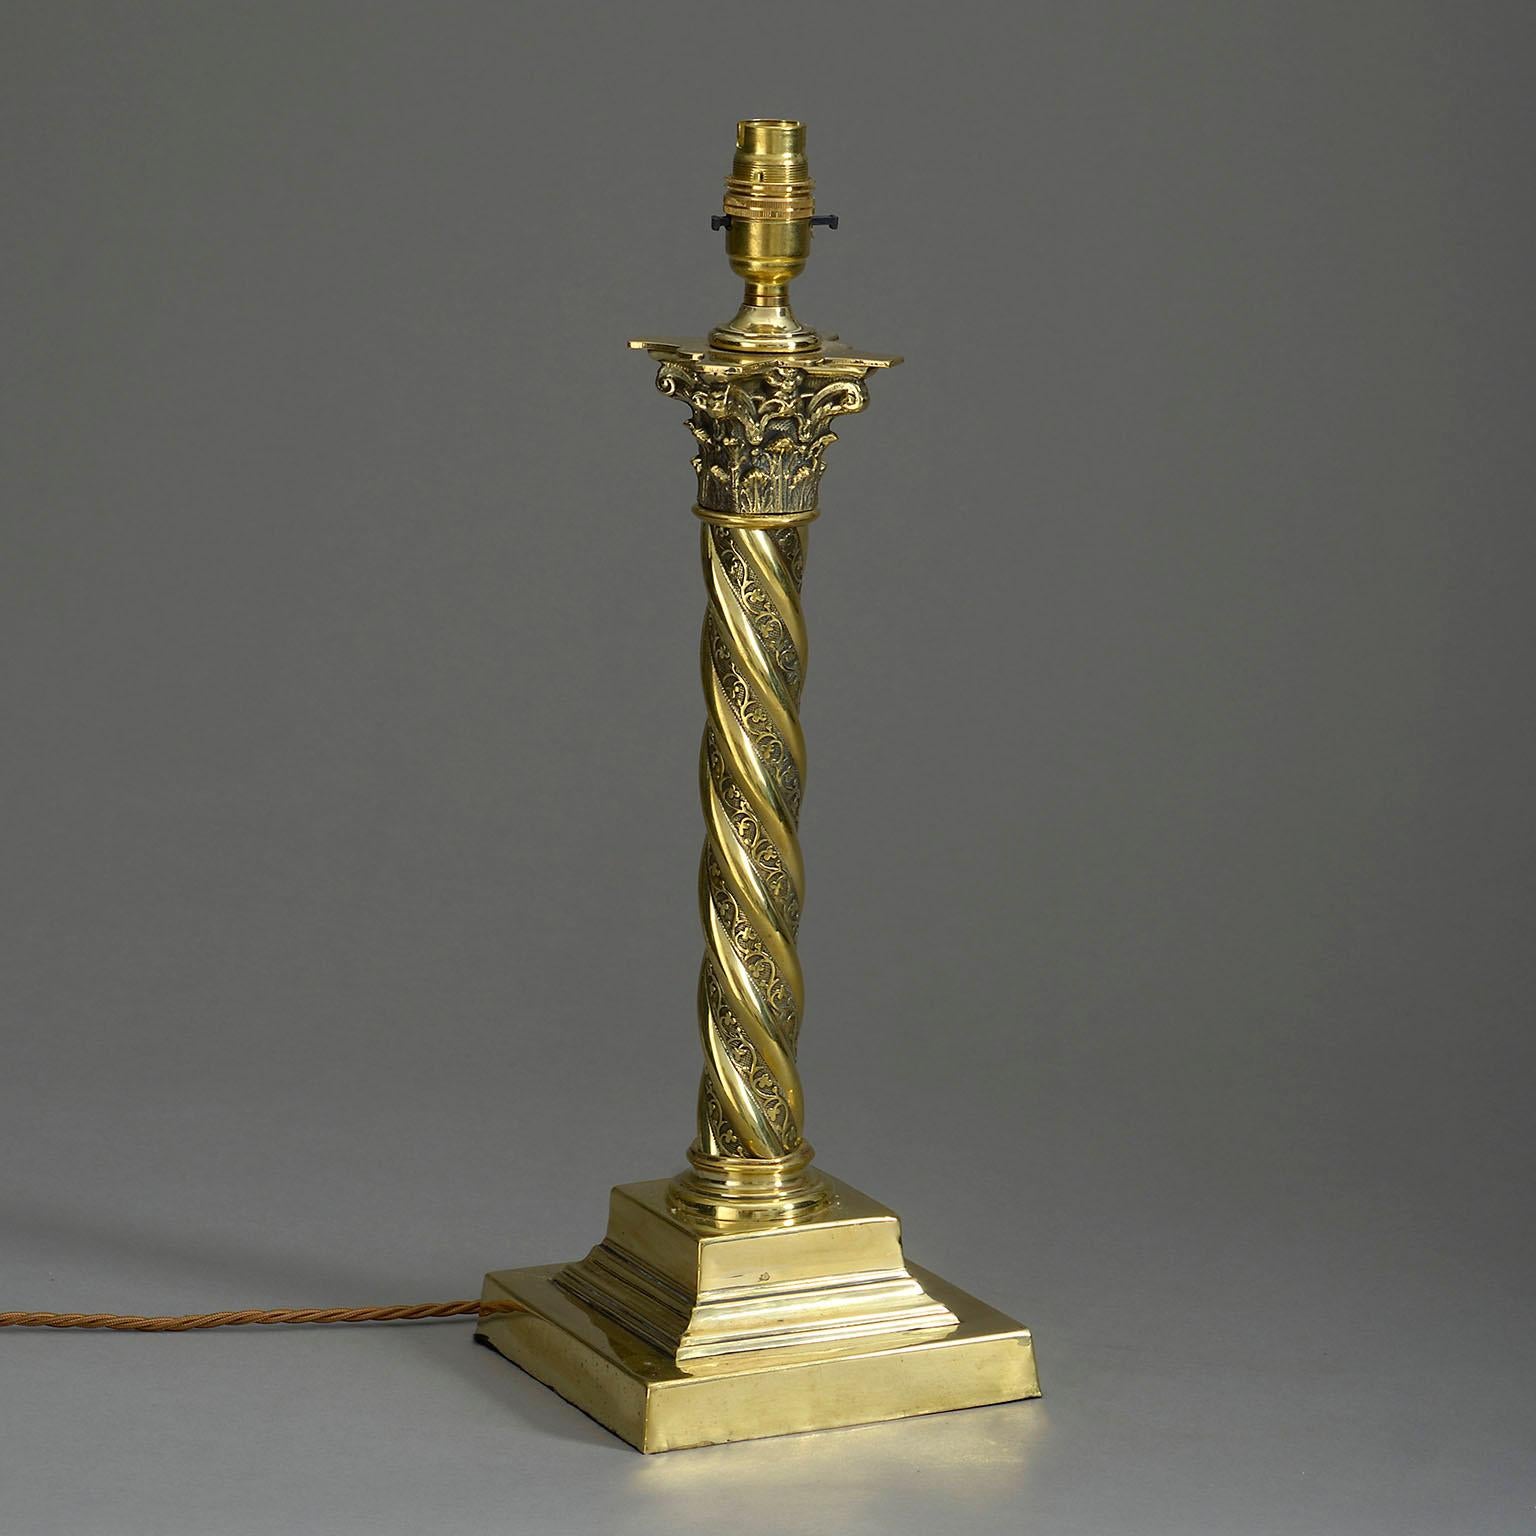 A late nineteenth century Victorian Period brass table lamp, the corinthian capital set upon a spiral stem and terminating in a square plinth base.

Wired to UK Standards. This lamp can be rewired to all international specifications inclusive of